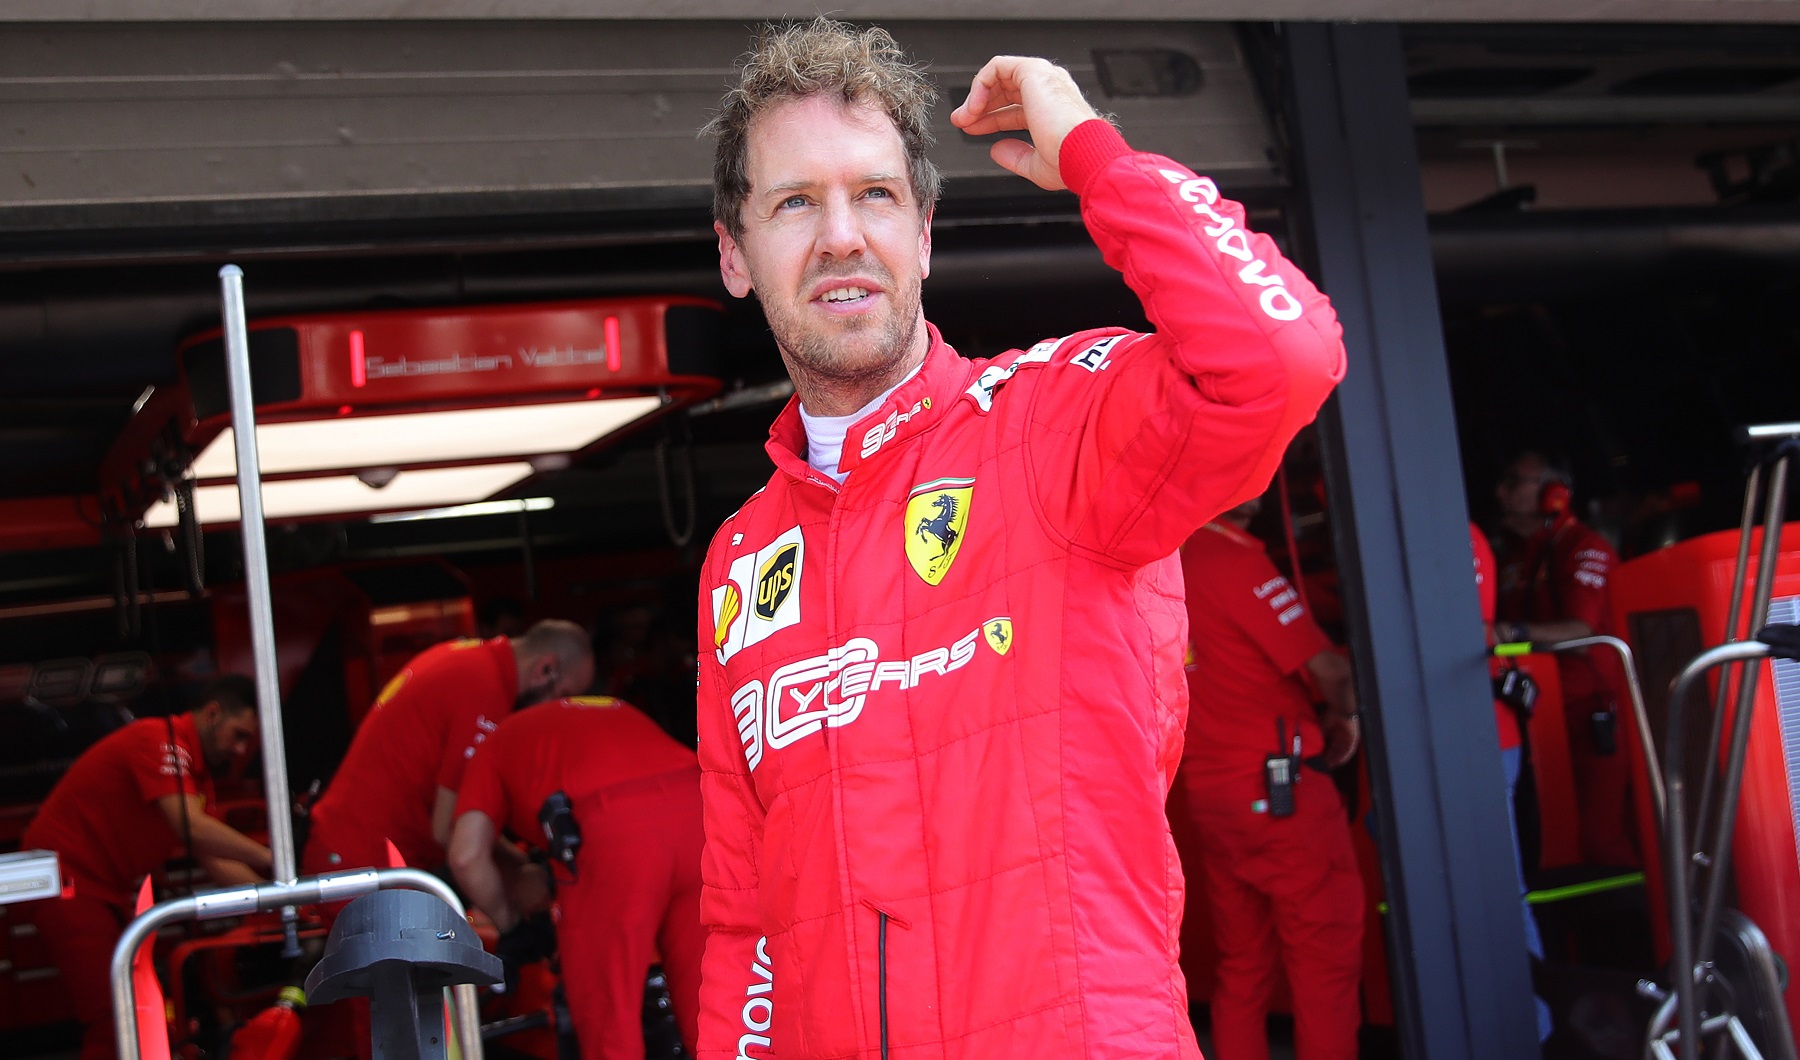 Sebastian Vettel Received Support From an Unlikely Source in His Worst Formula 1 Season